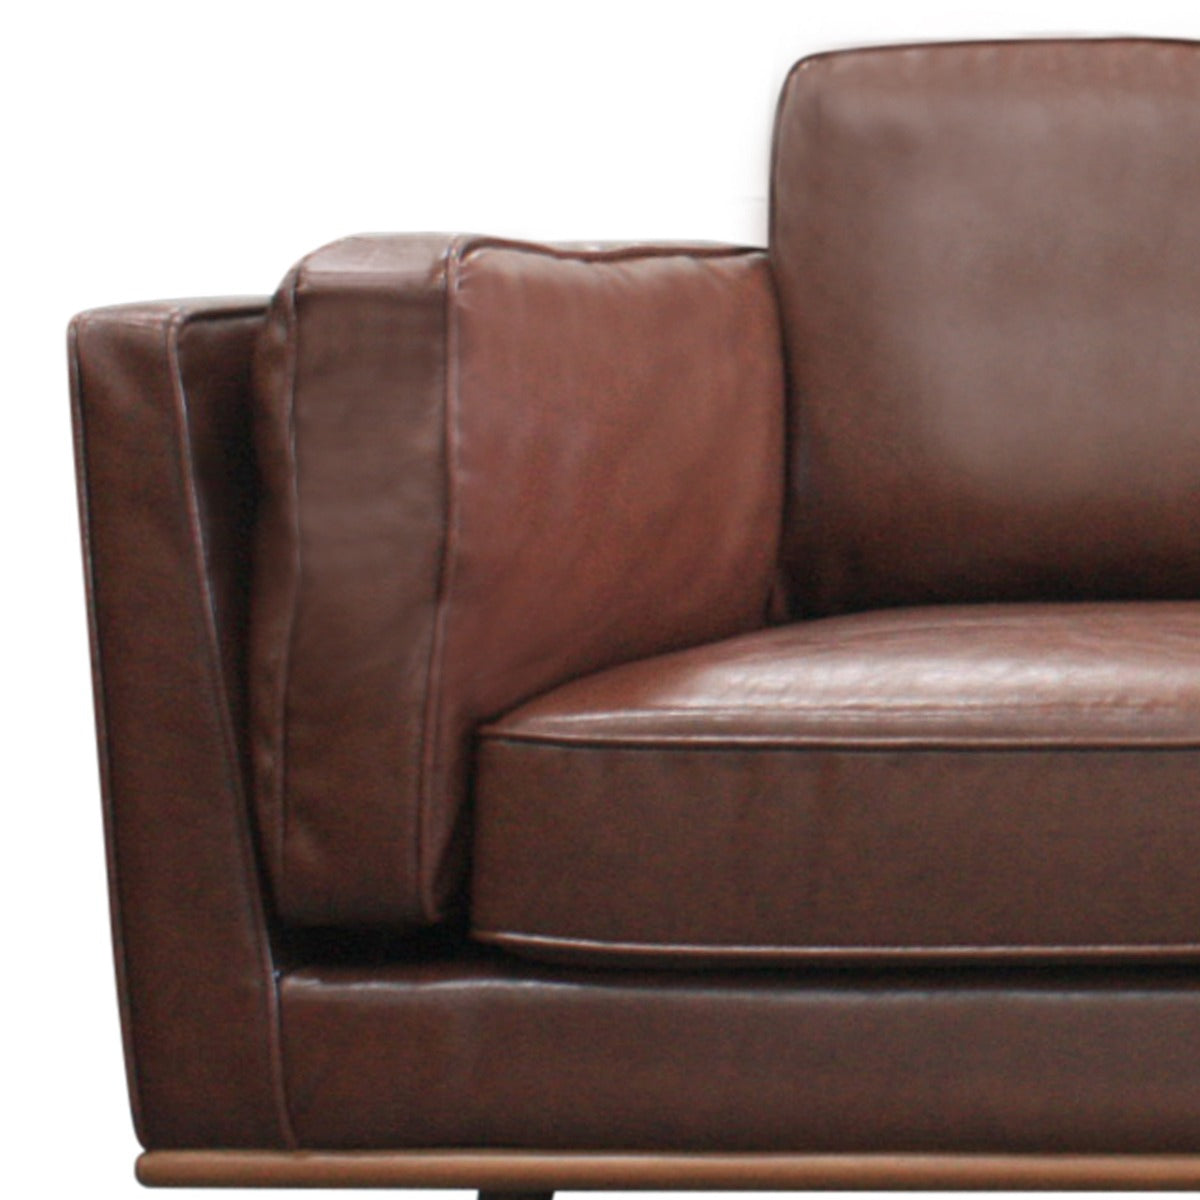 Rebo Faux Leather Sofa 2 Seater with Solid Wooden Frame - Brown - Notbrand